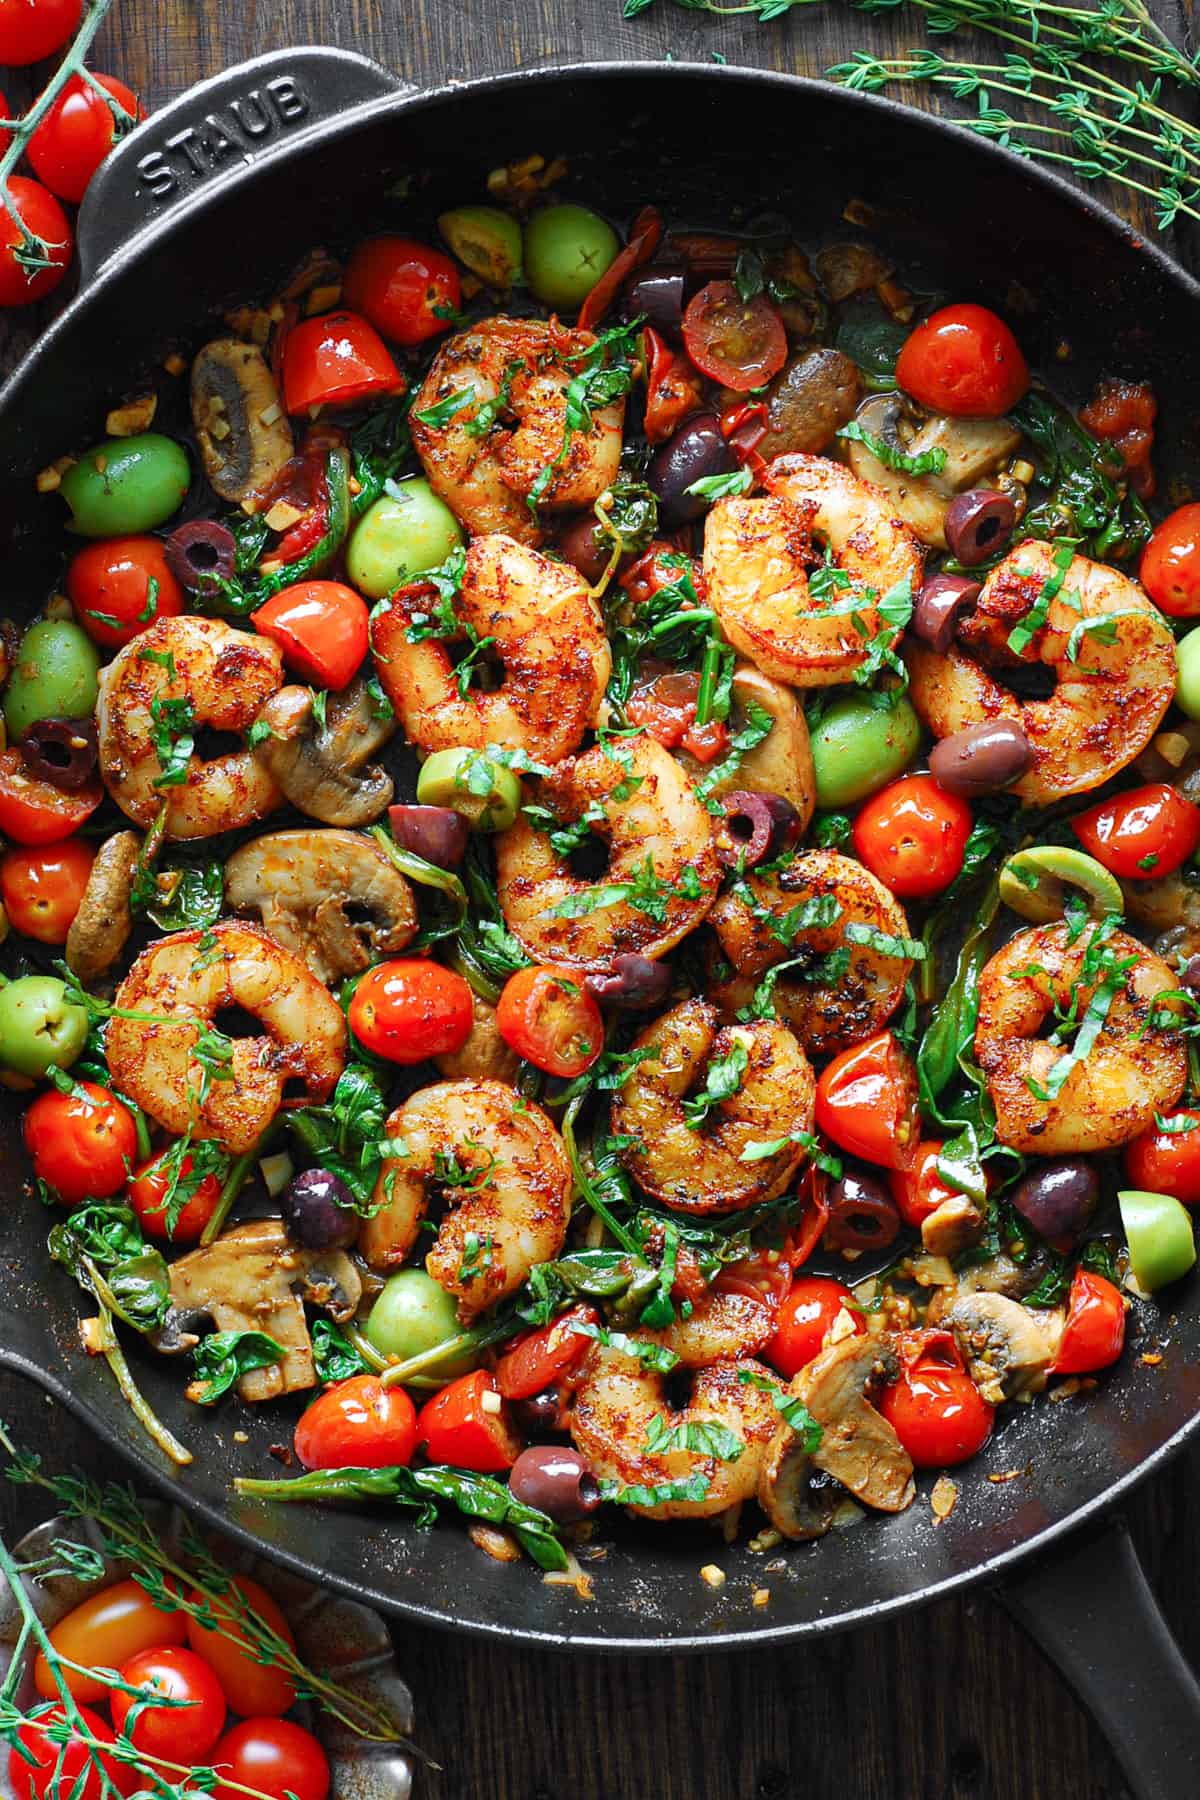 Mediterranean shrimp with olives, cherry tomatoes, garlic, mushrooms, spinach, and a white wine sauce - in a cast iron skillet.